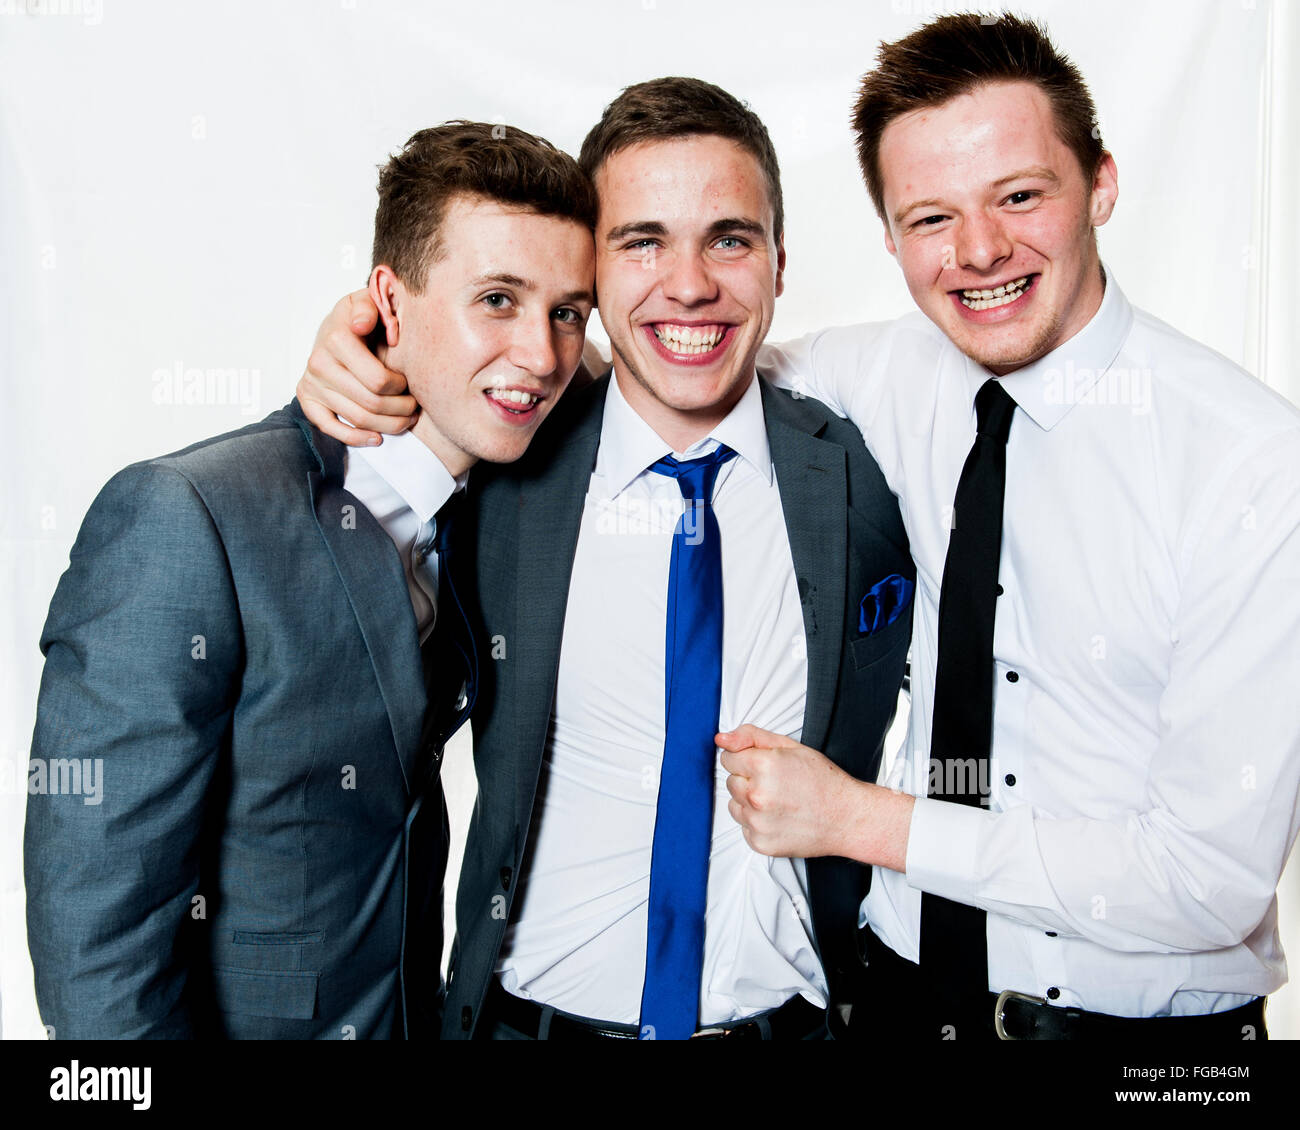 Young smart males at a teenage prom for teenagers to mark coming of age Stock Photo